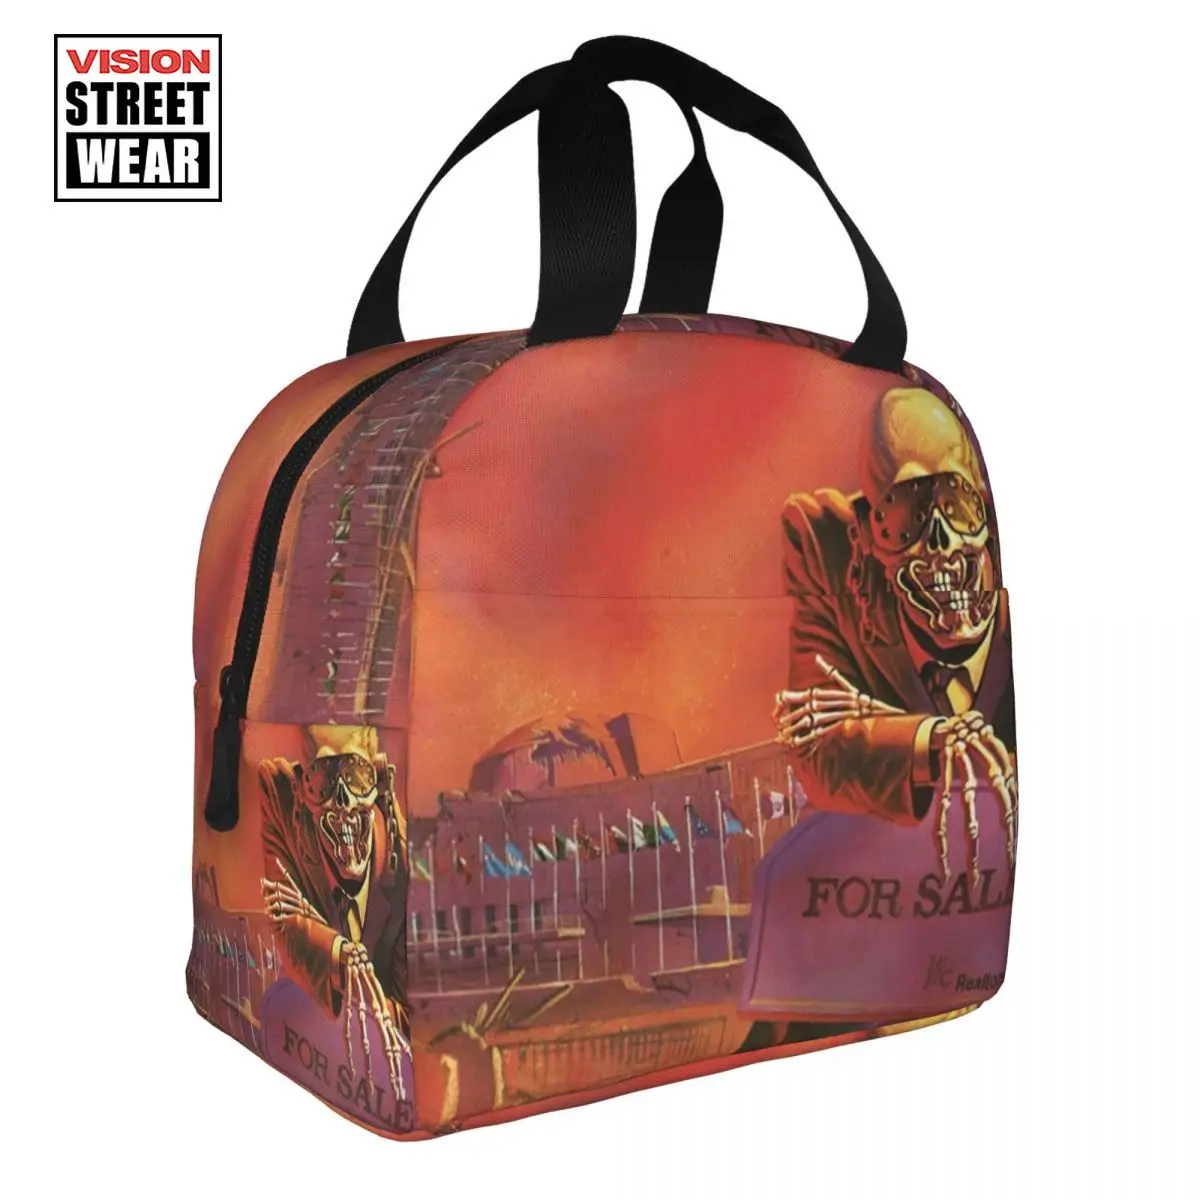 

Megadeths Rock Band Insulated Lunch Tote Bag for Women Heavy Metal Band Resuable Cooler Thermal Bento Box Work School Travel